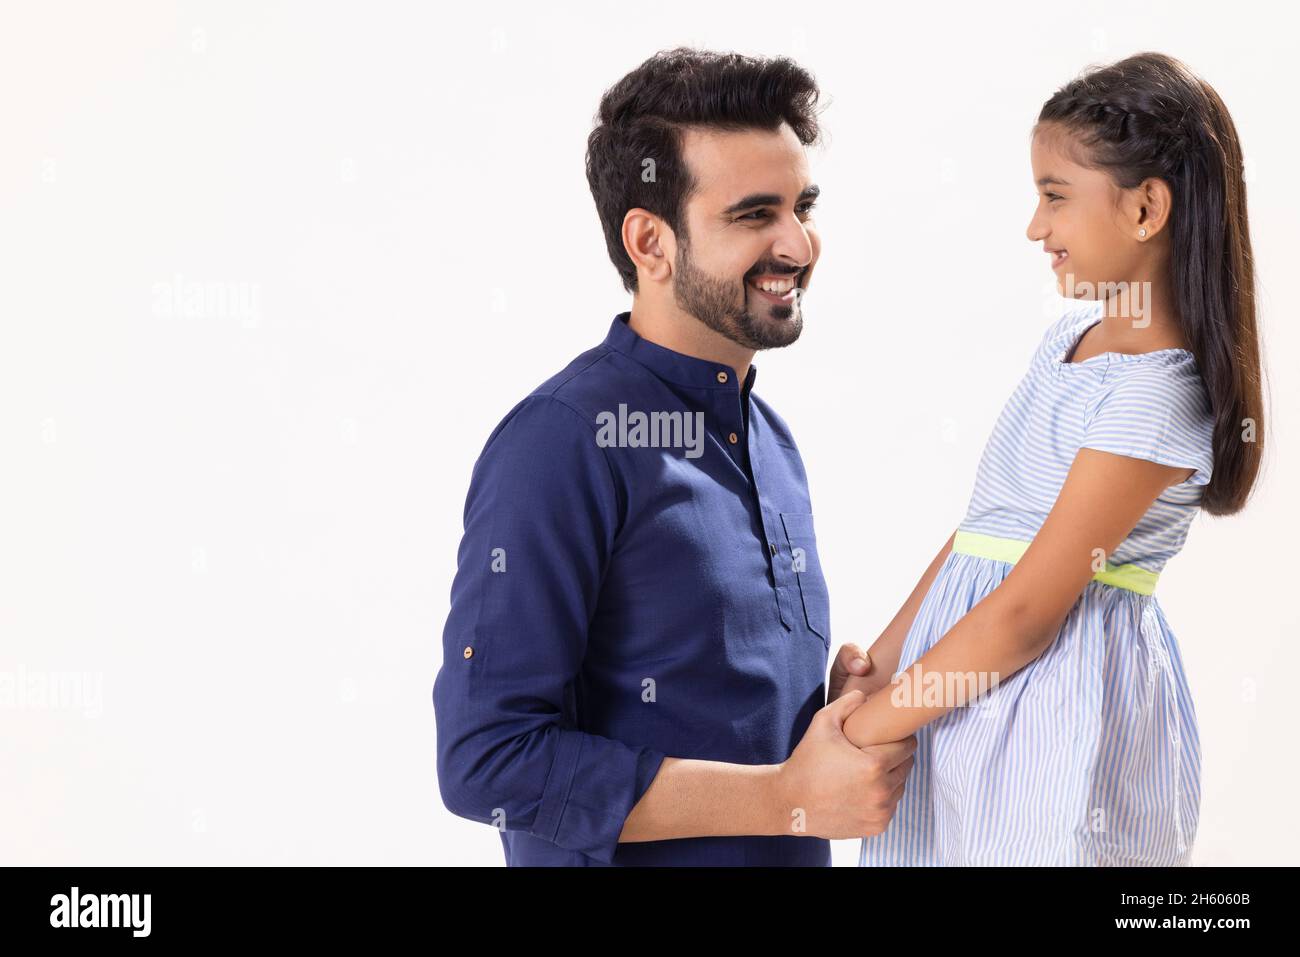 A HAPPY FATHER AND DAUGHTER LOOKING AT EACH OTHER Stock Photo